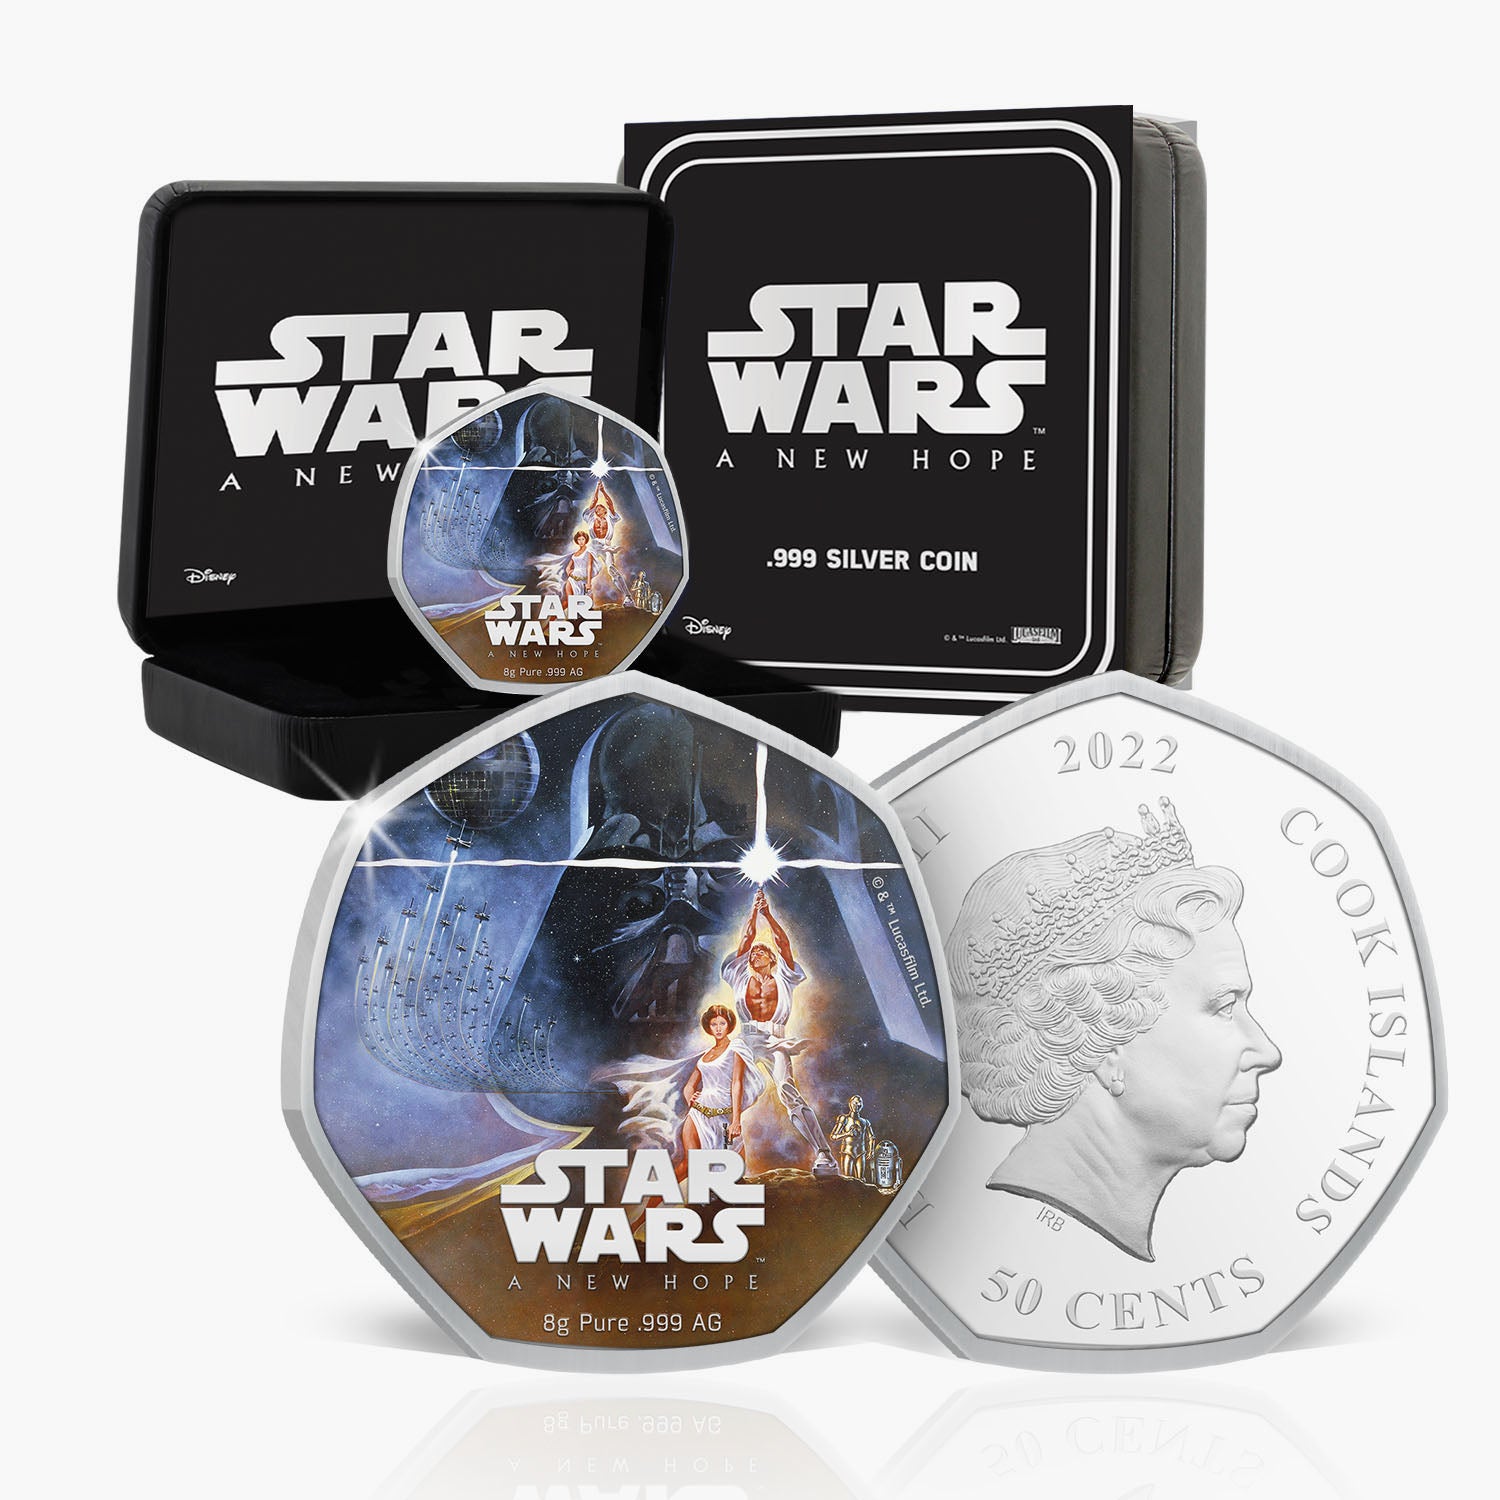 The Star Wars 40th Anniversary Return of the Jedi Solid Silver Coin